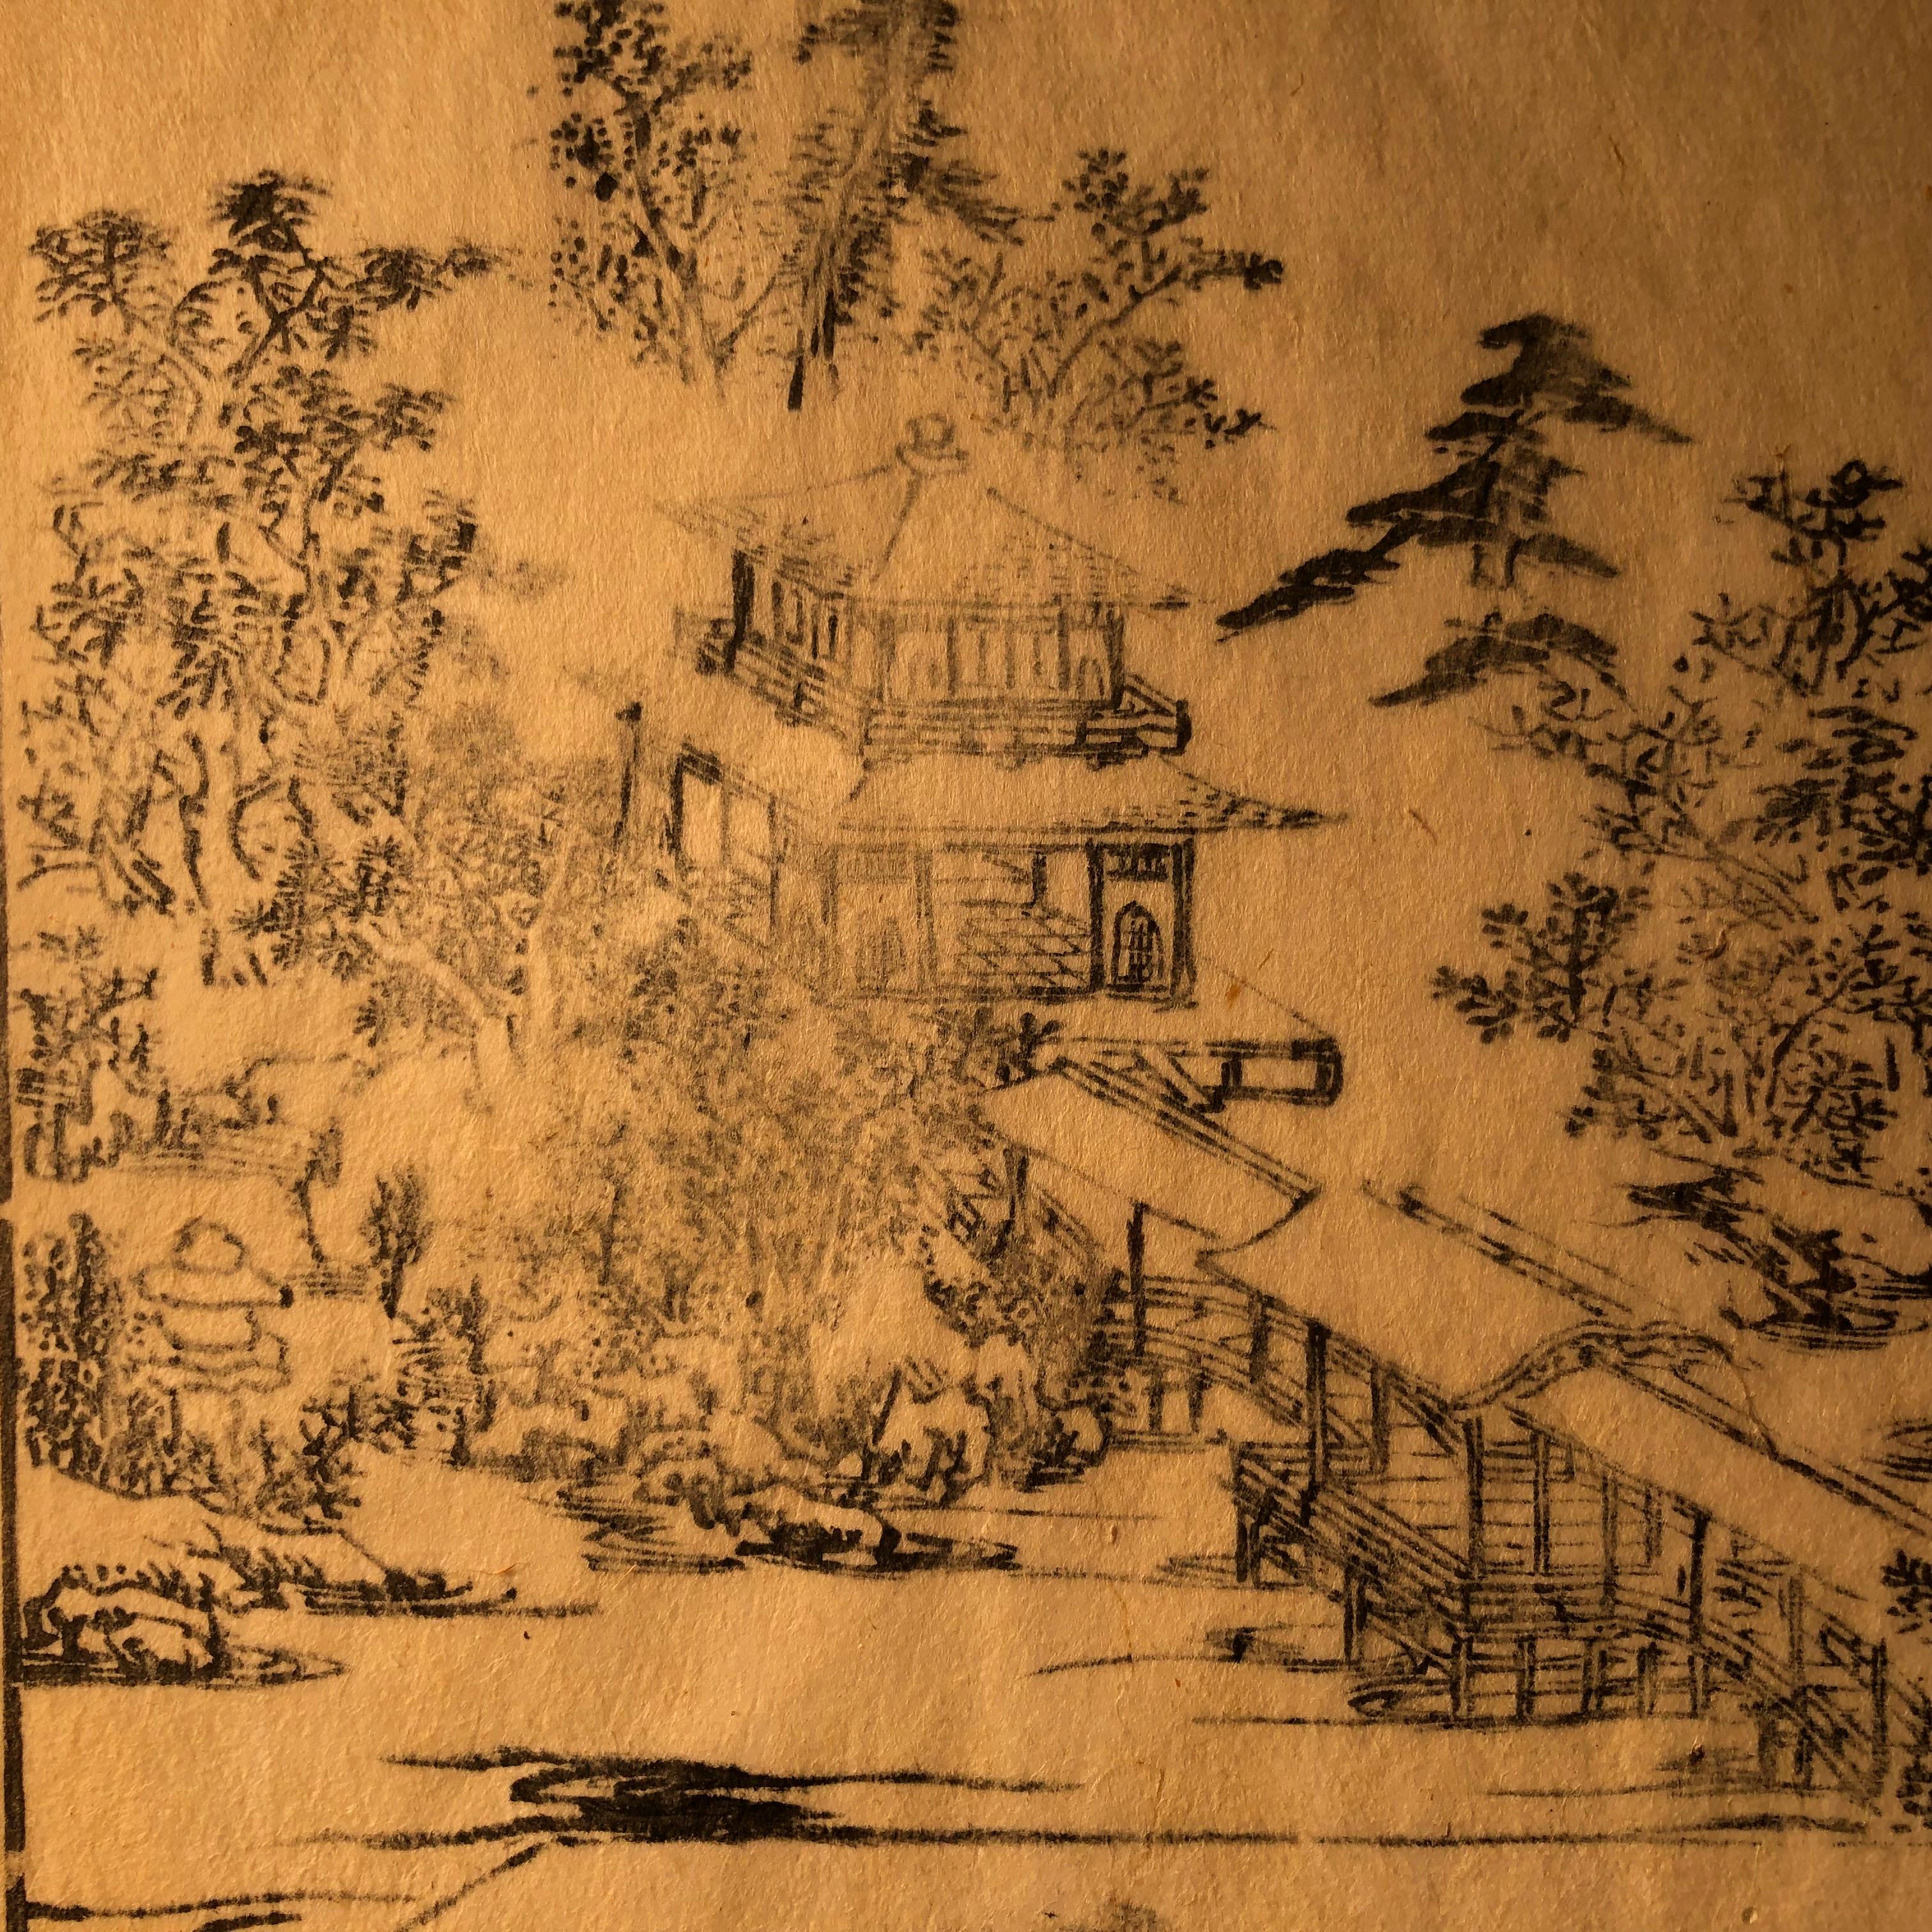 Hand-Crafted Japanese Four Old Kyoto Garden Woodblock Prints 18th-19th Century, Frameable #1